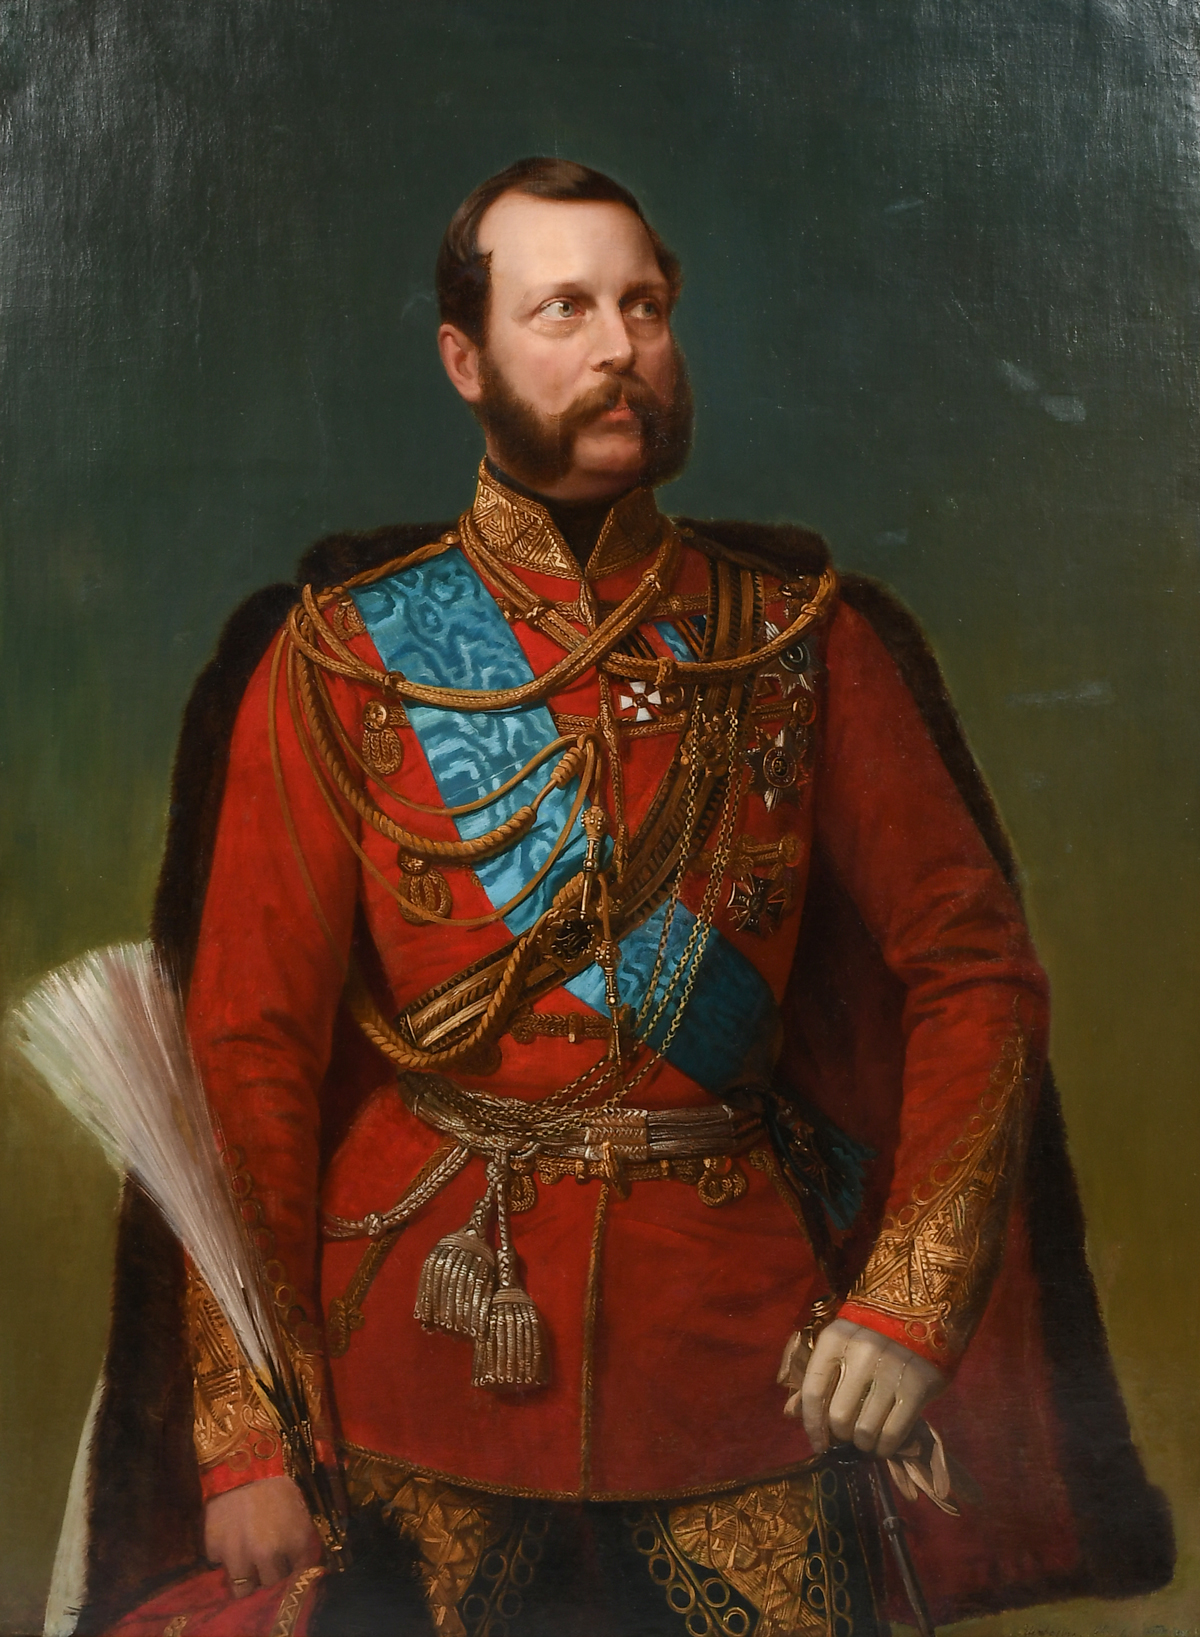 LARGE EARLY PORTRAIT PAINTING OF